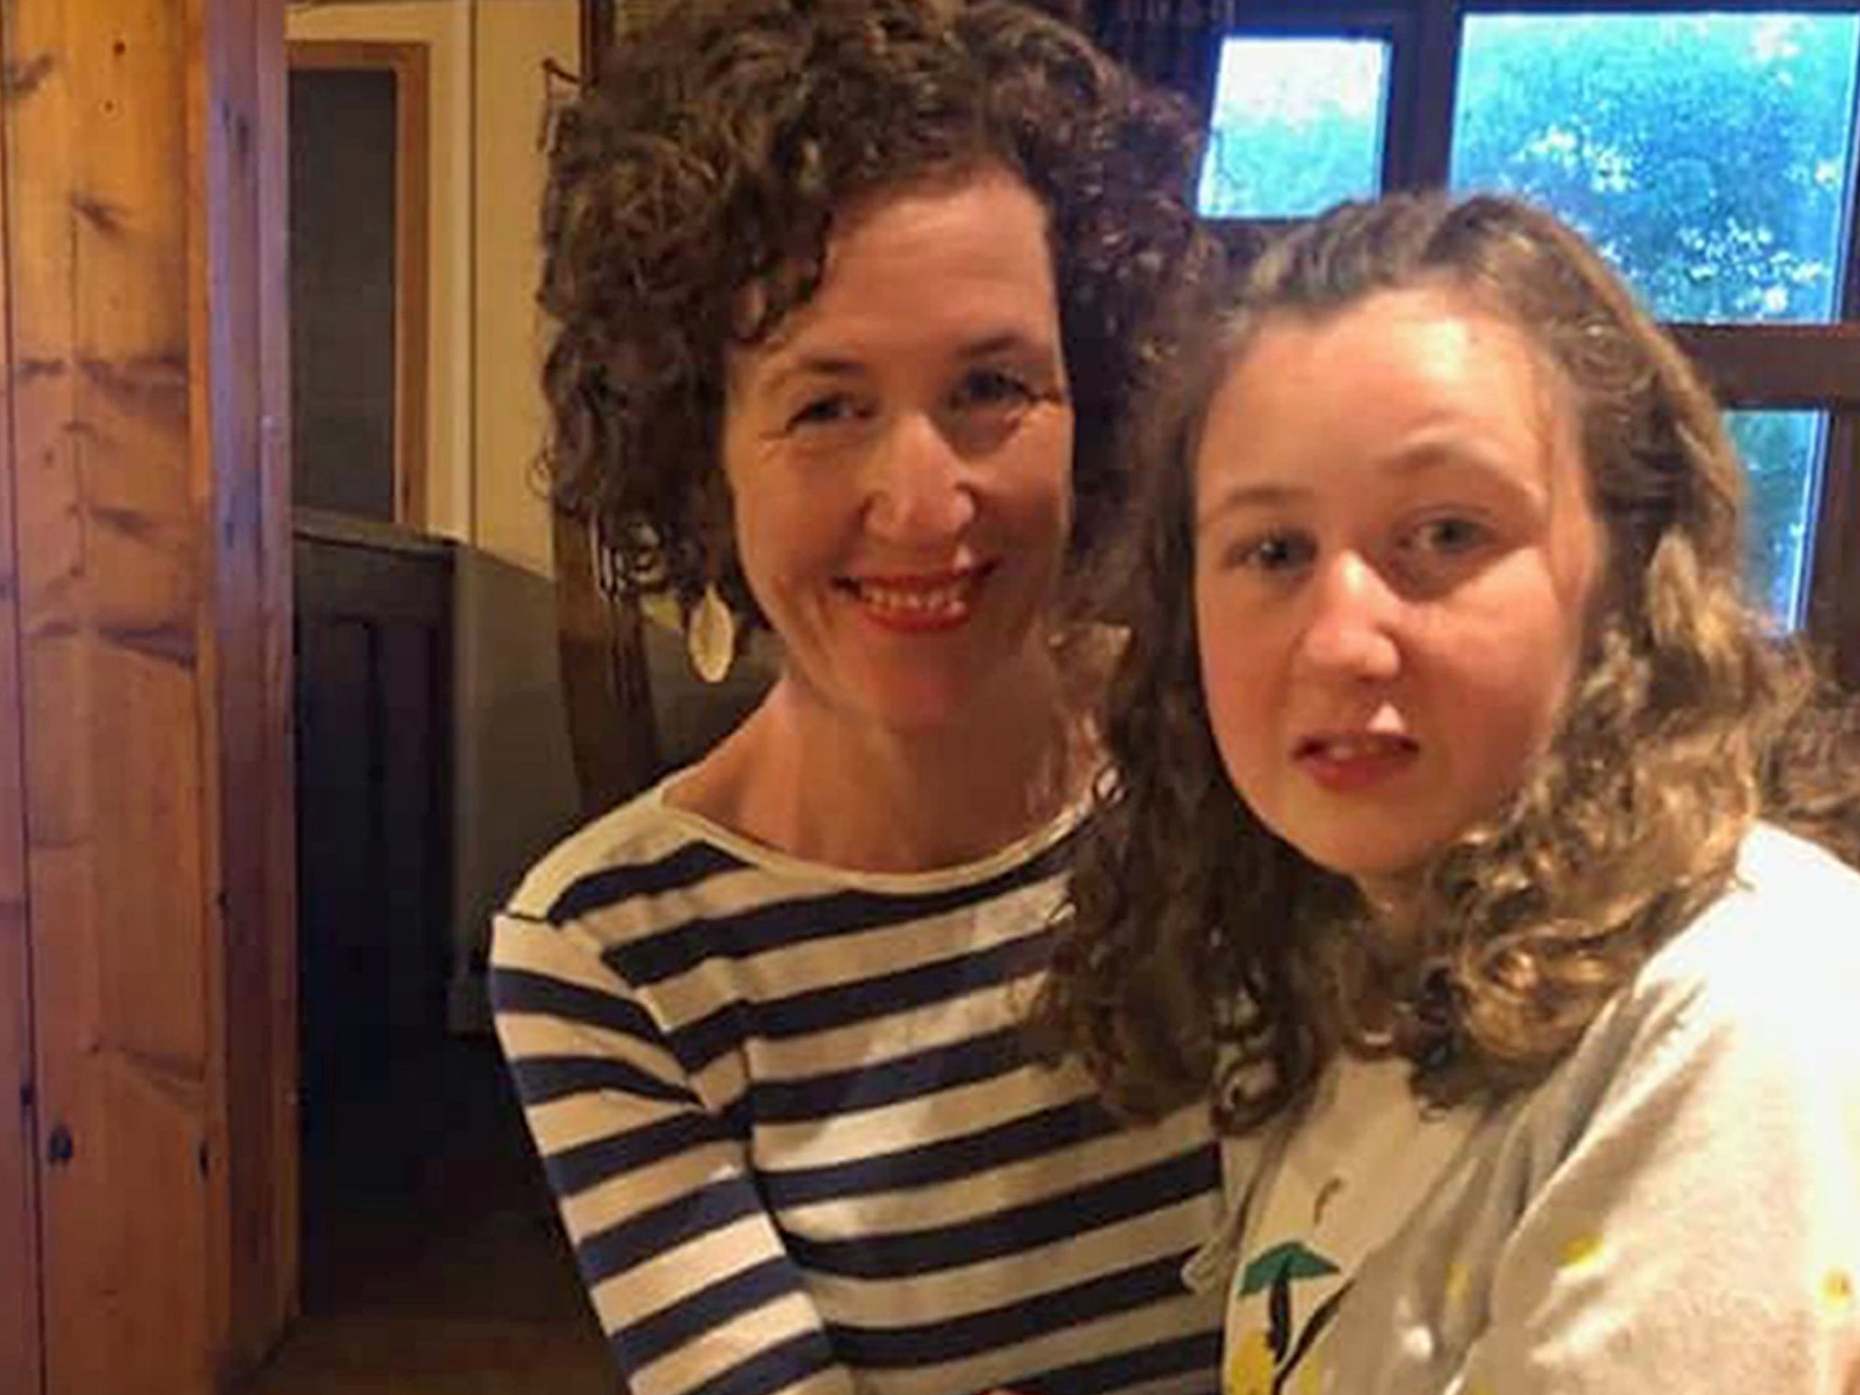 Undated family handout photo of Meabh Quoirin with her daughter Nora Quoirin, who was found dead after going missing during a family holiday in Malaysia in August 2019